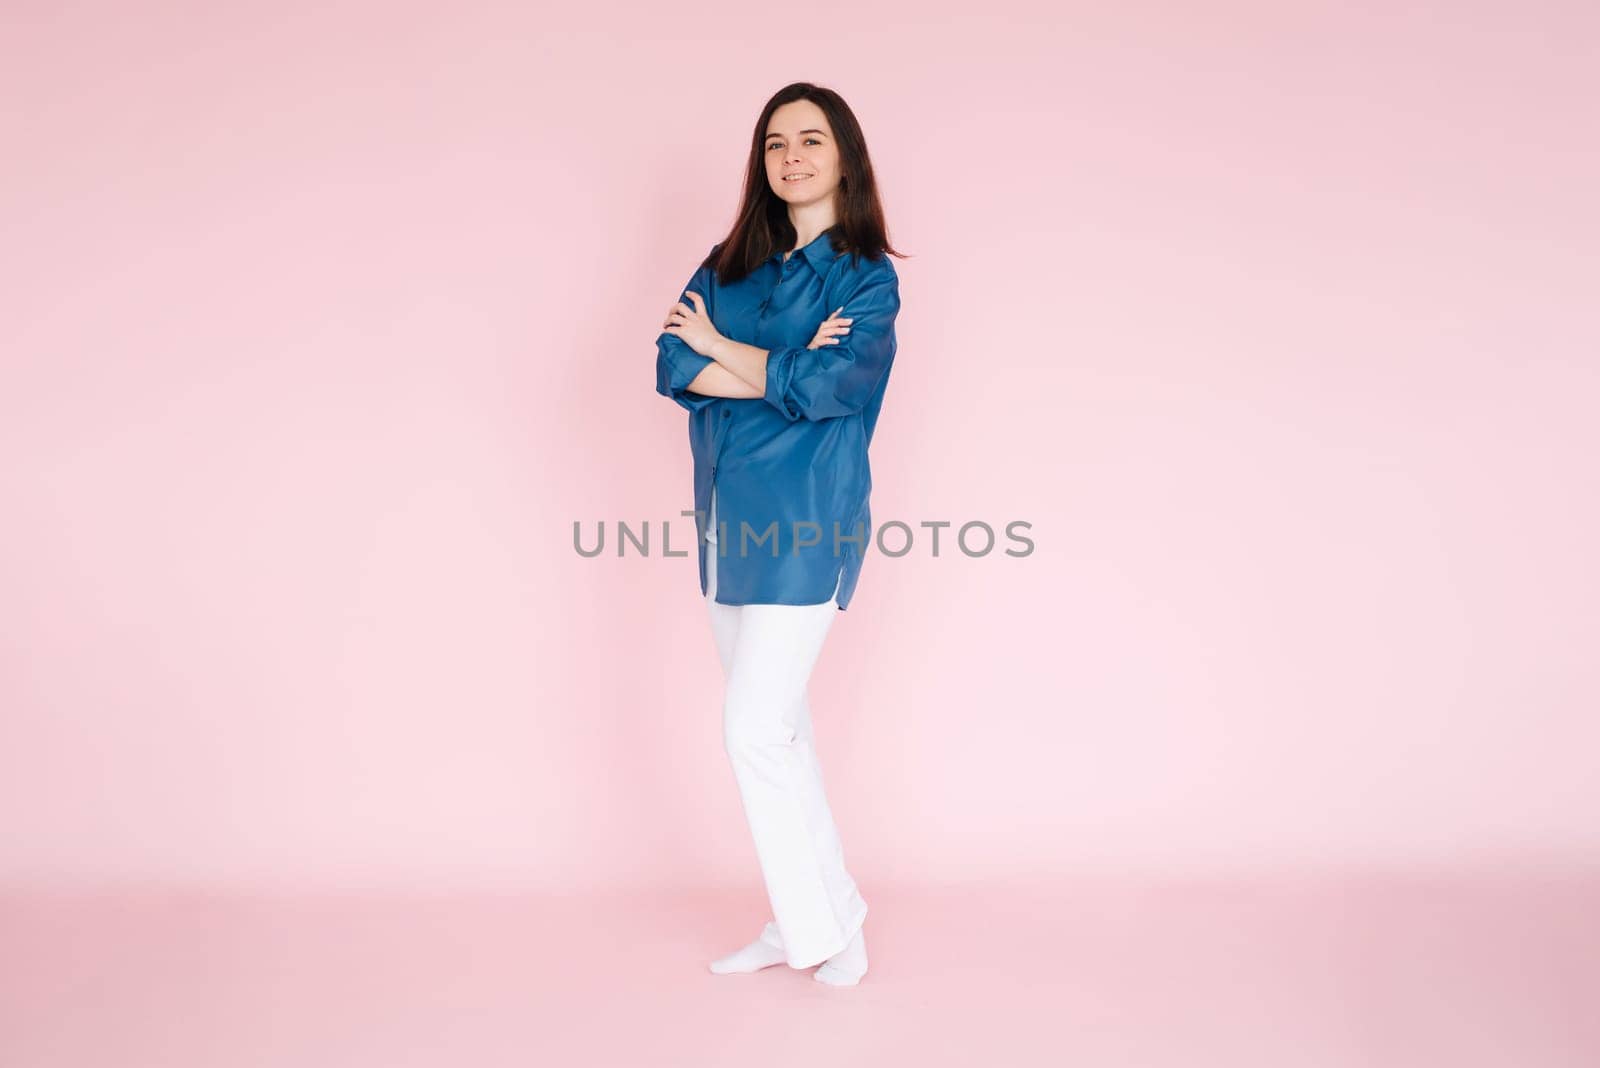 Portrait of professional businesswoman in smart casual attire standing confidently with folded hands, isolated on a pink background.